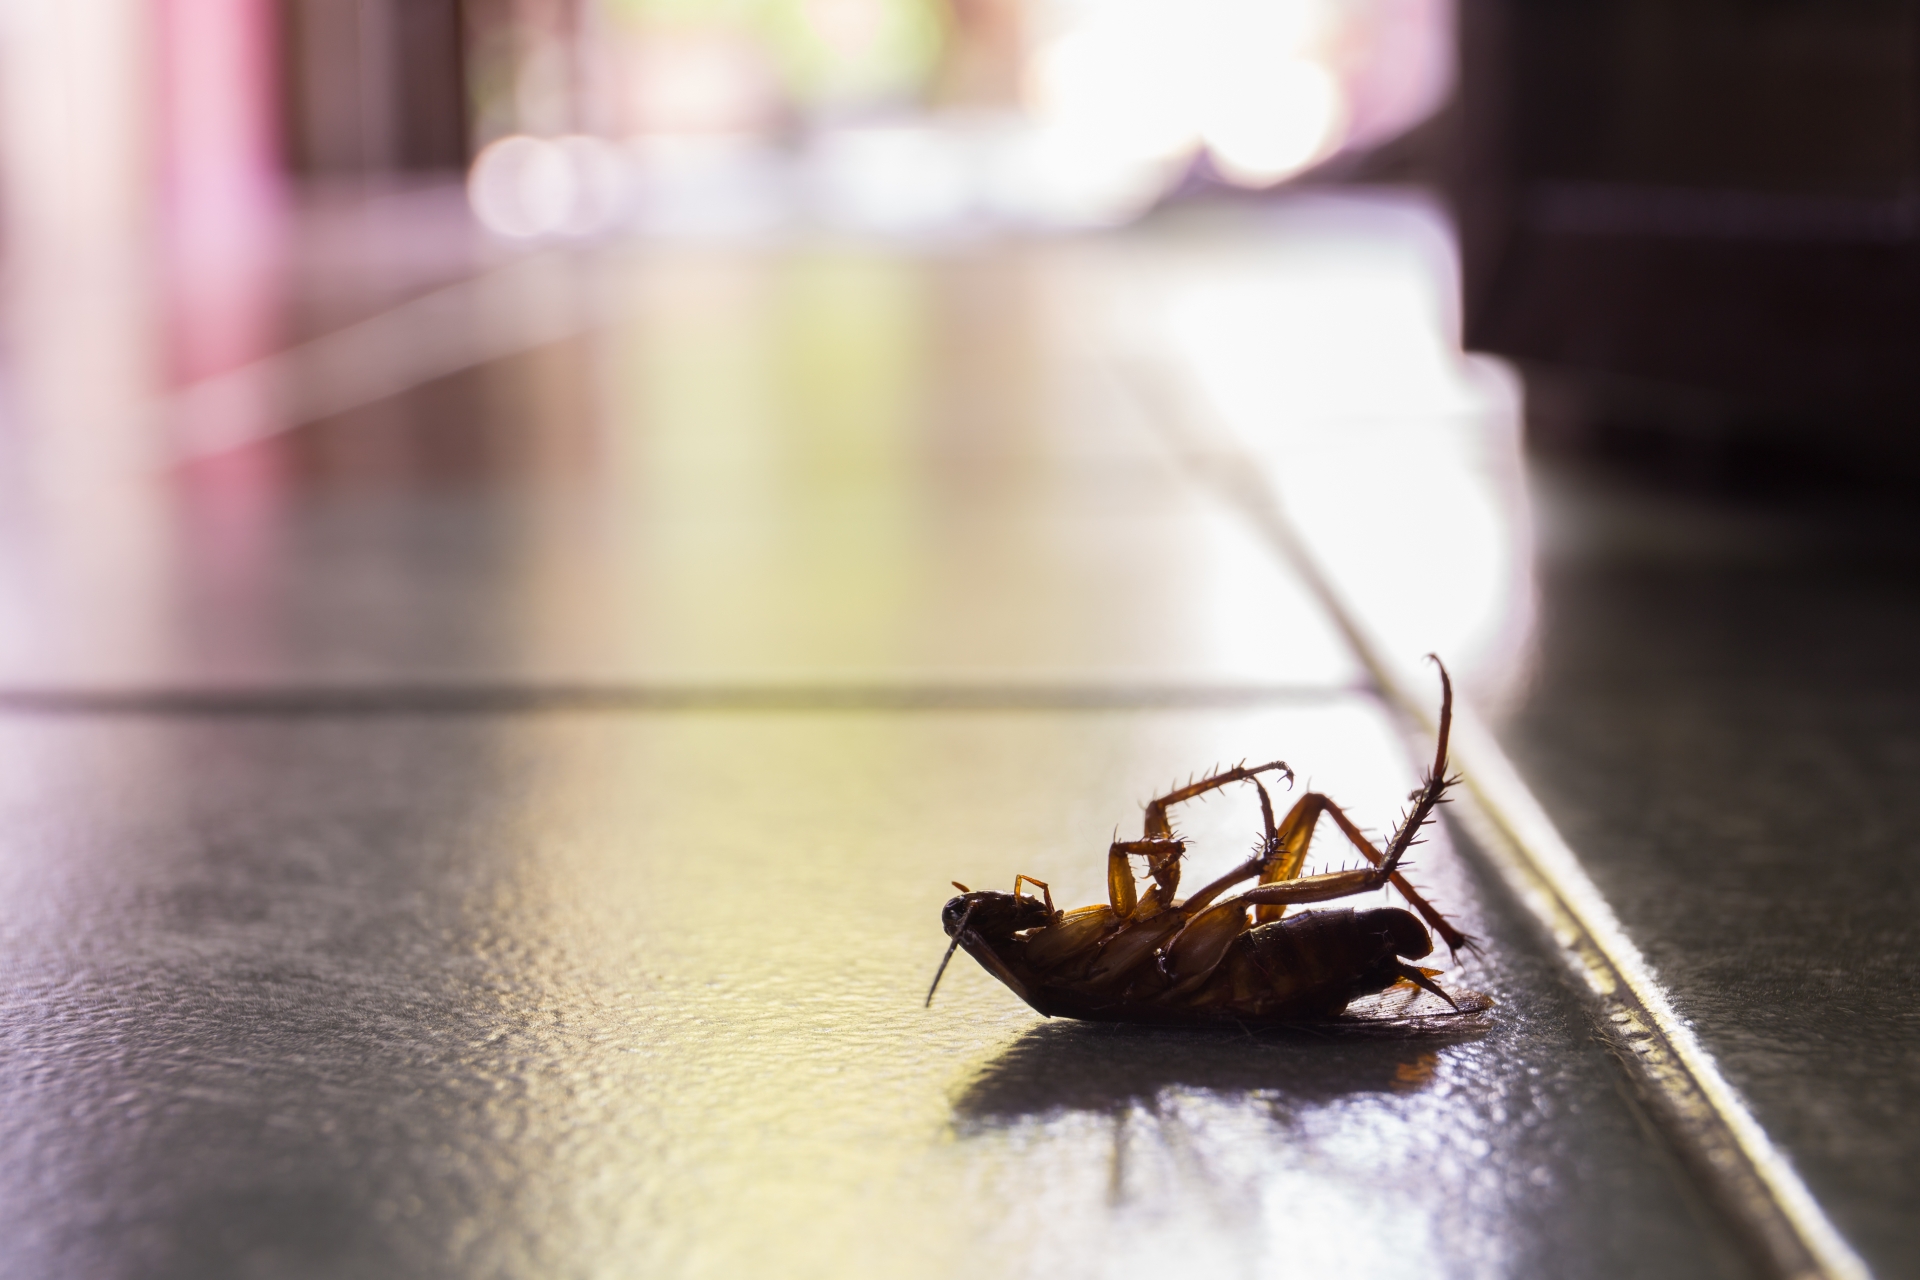 Cockroach Control, Pest Control in Ilford, Loxford, IG1. Call Now 020 8166 9746